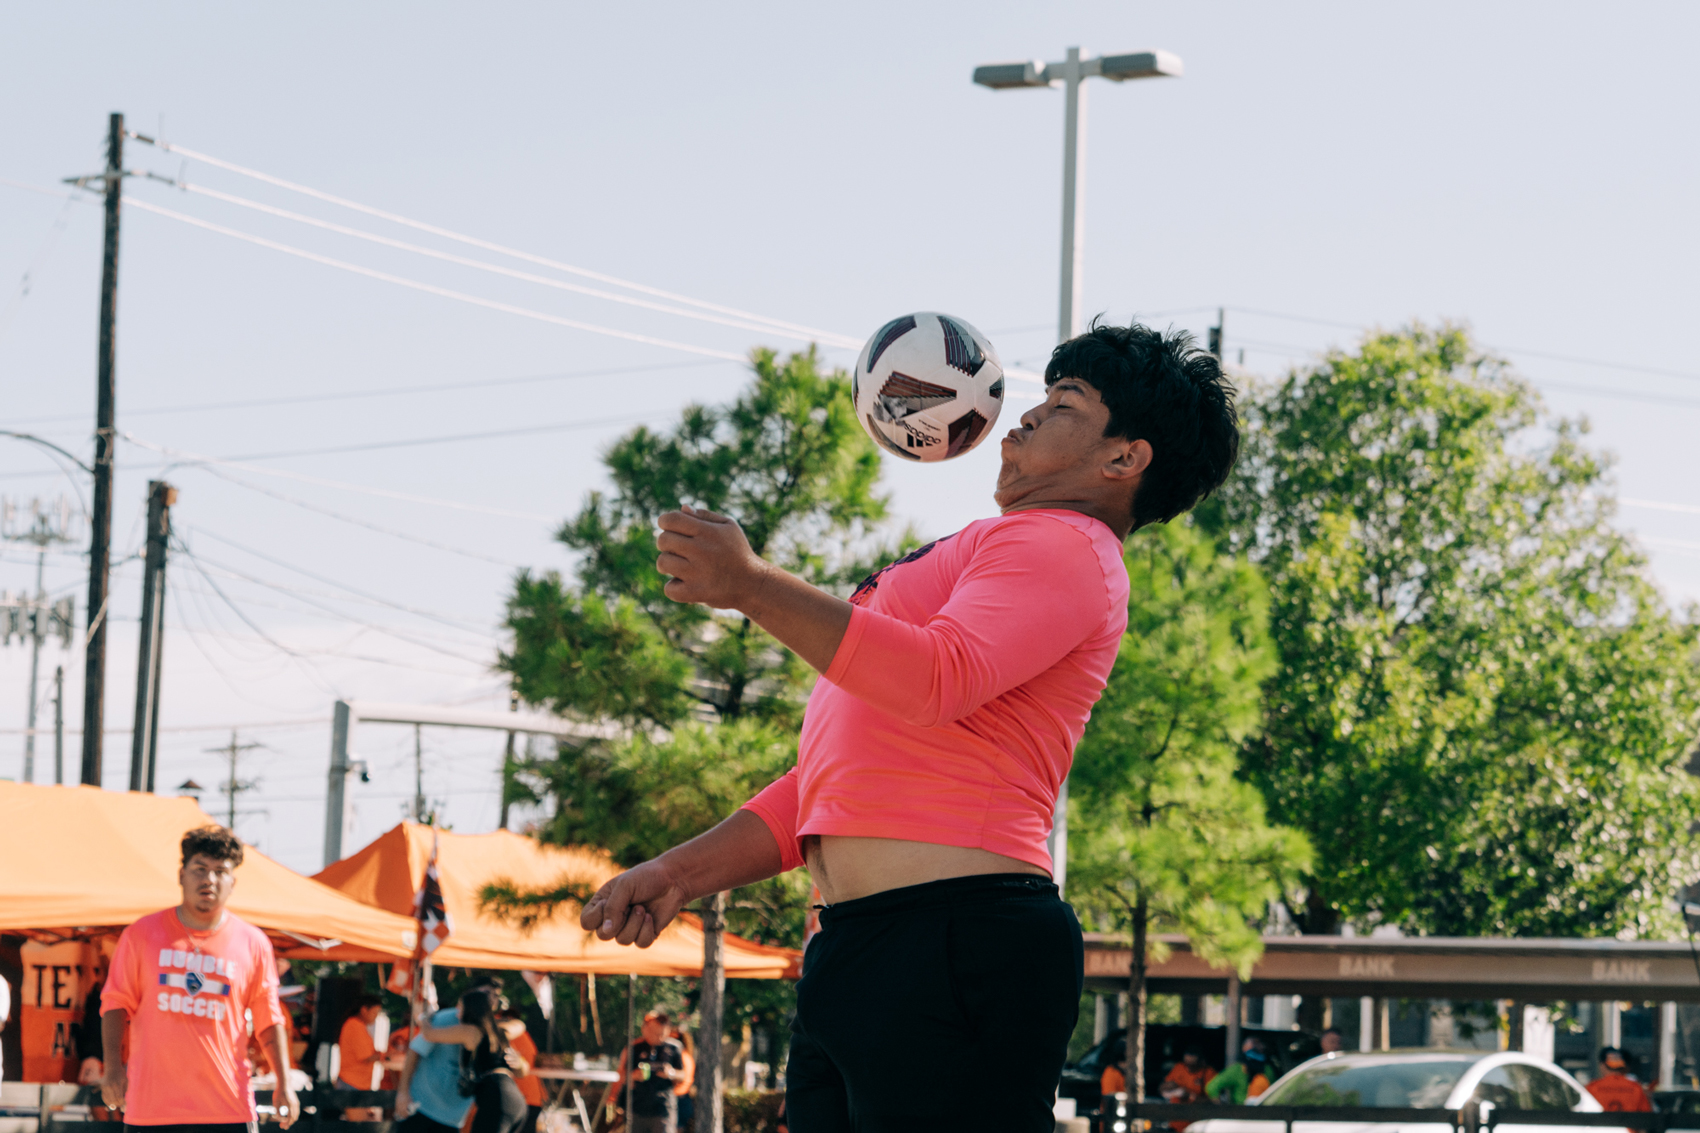 A soccer player stops the ball with his chest during Cascaritas, a gathering of friends and communities to play soccer on Saturday, Sept. 30, 2023, in Houston.